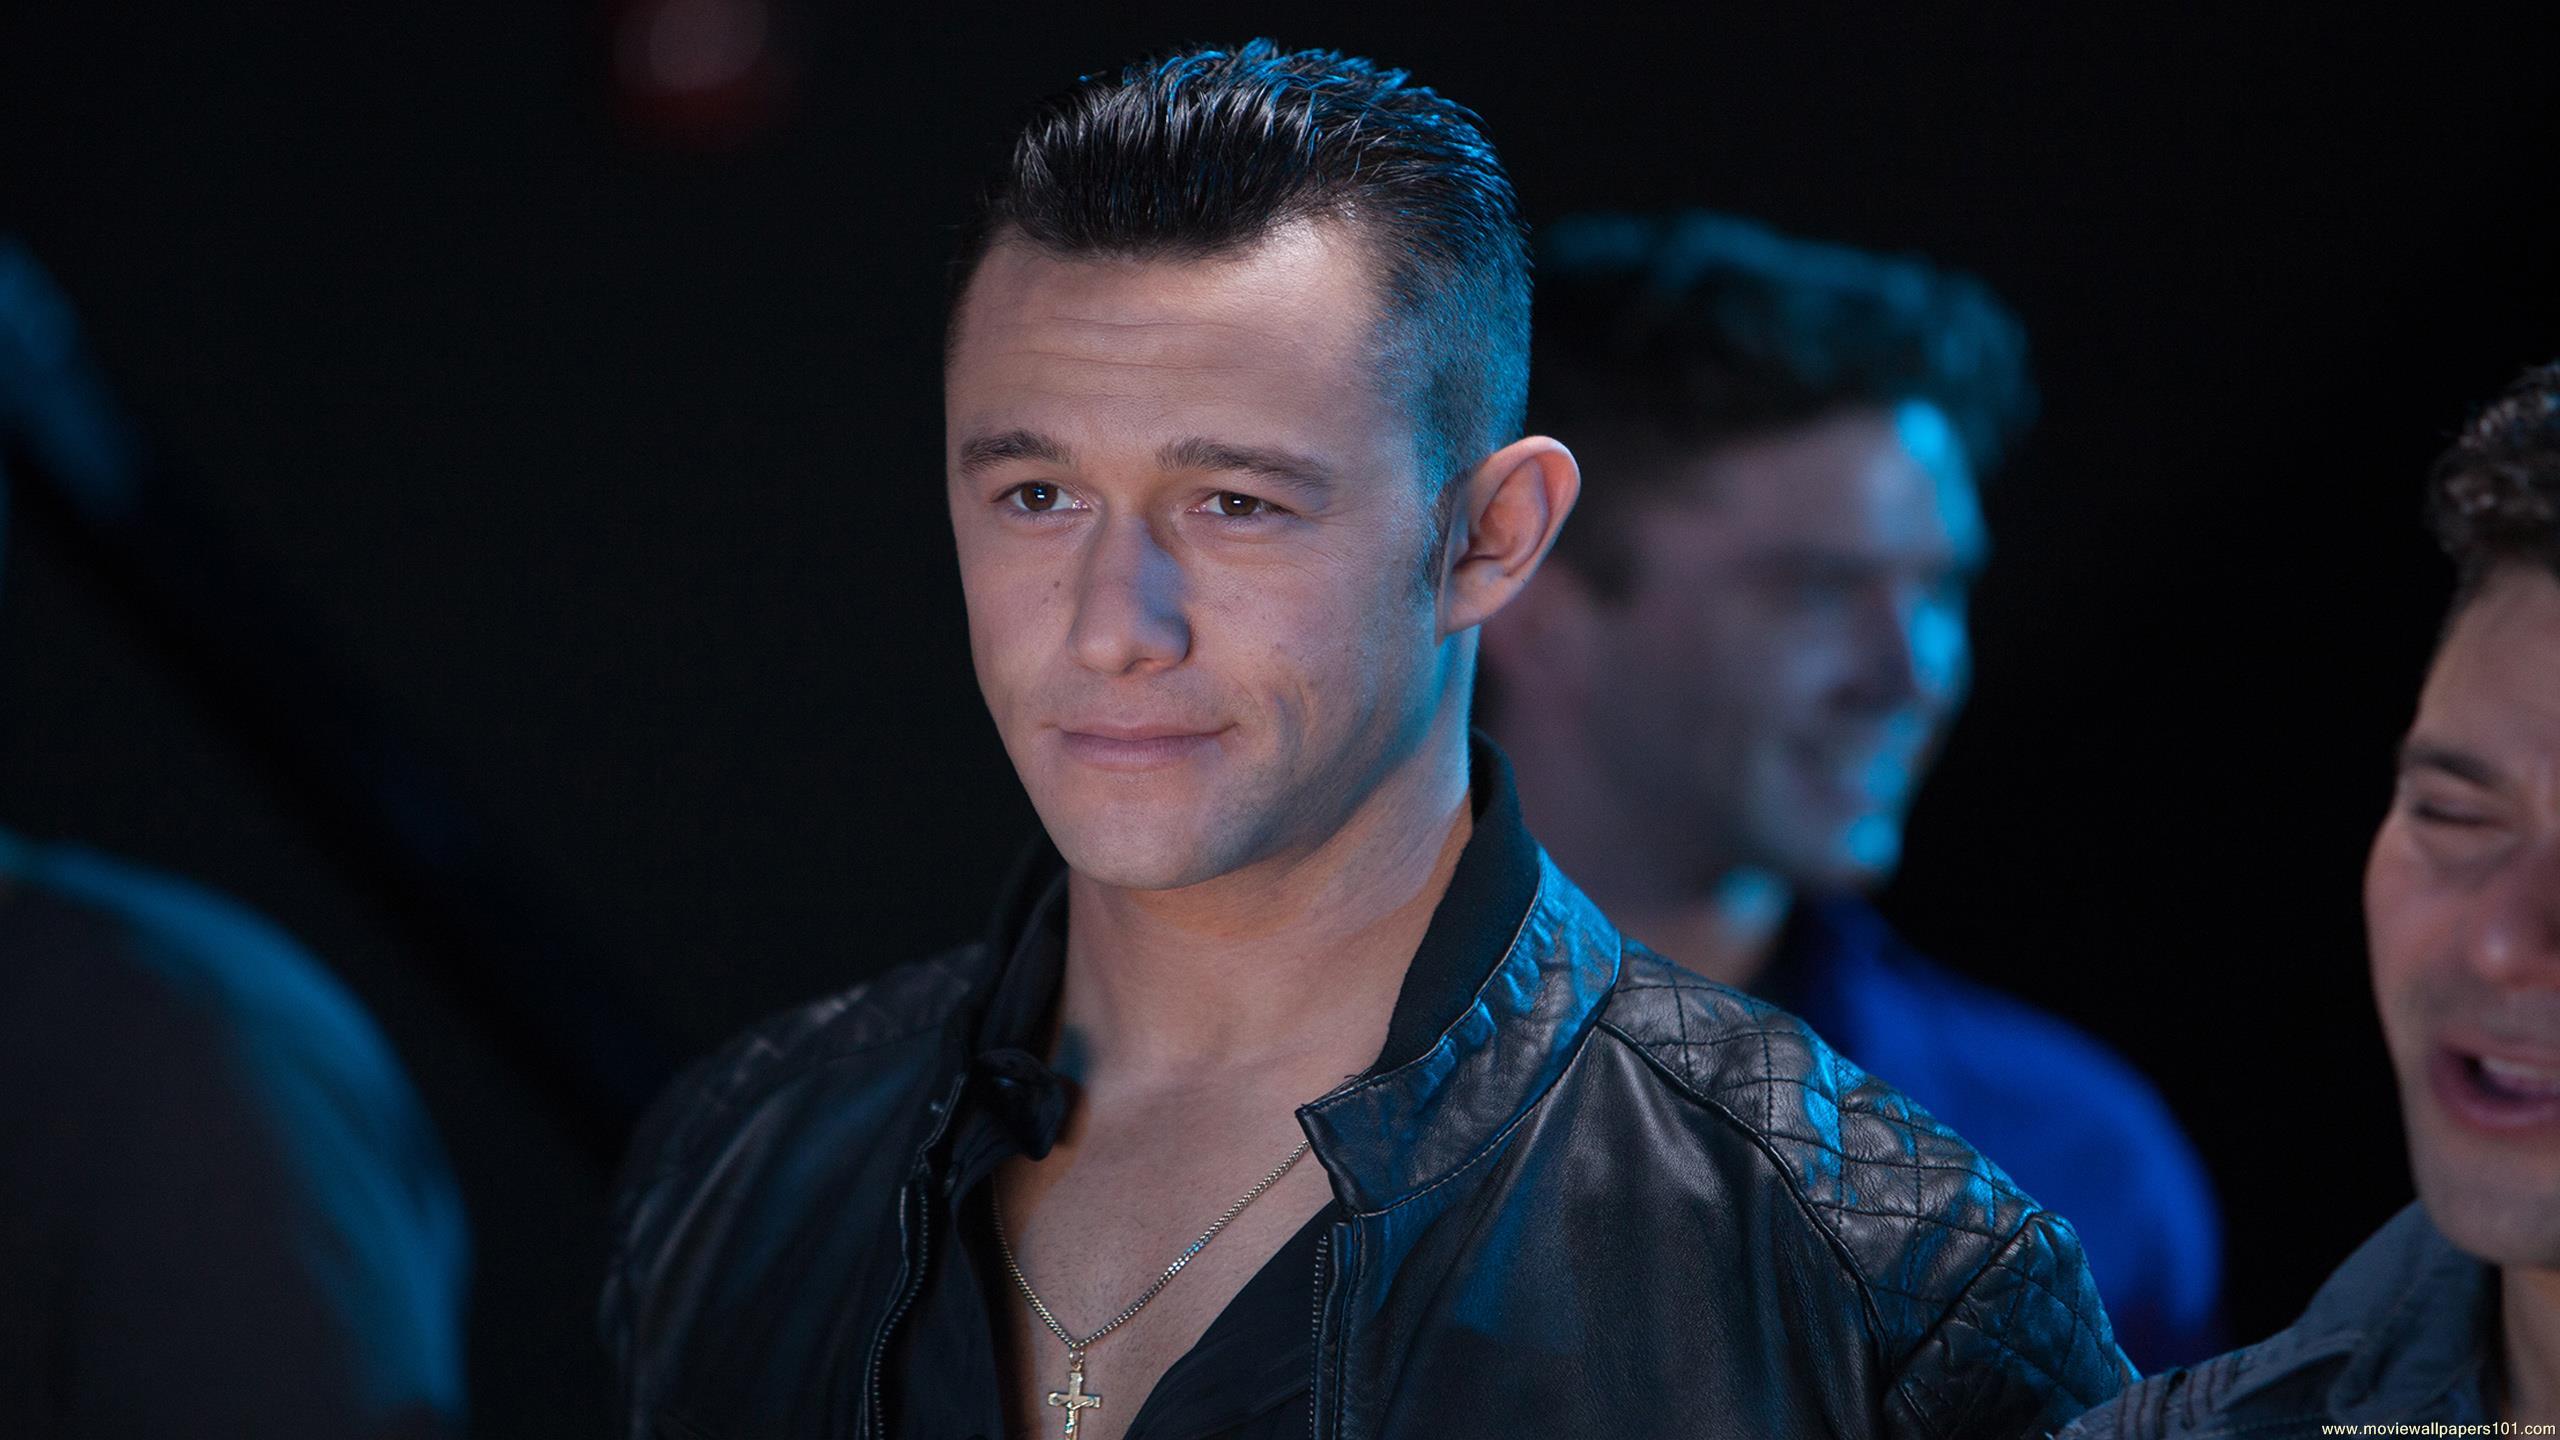 Amazing Don Jon Pictures & Backgrounds